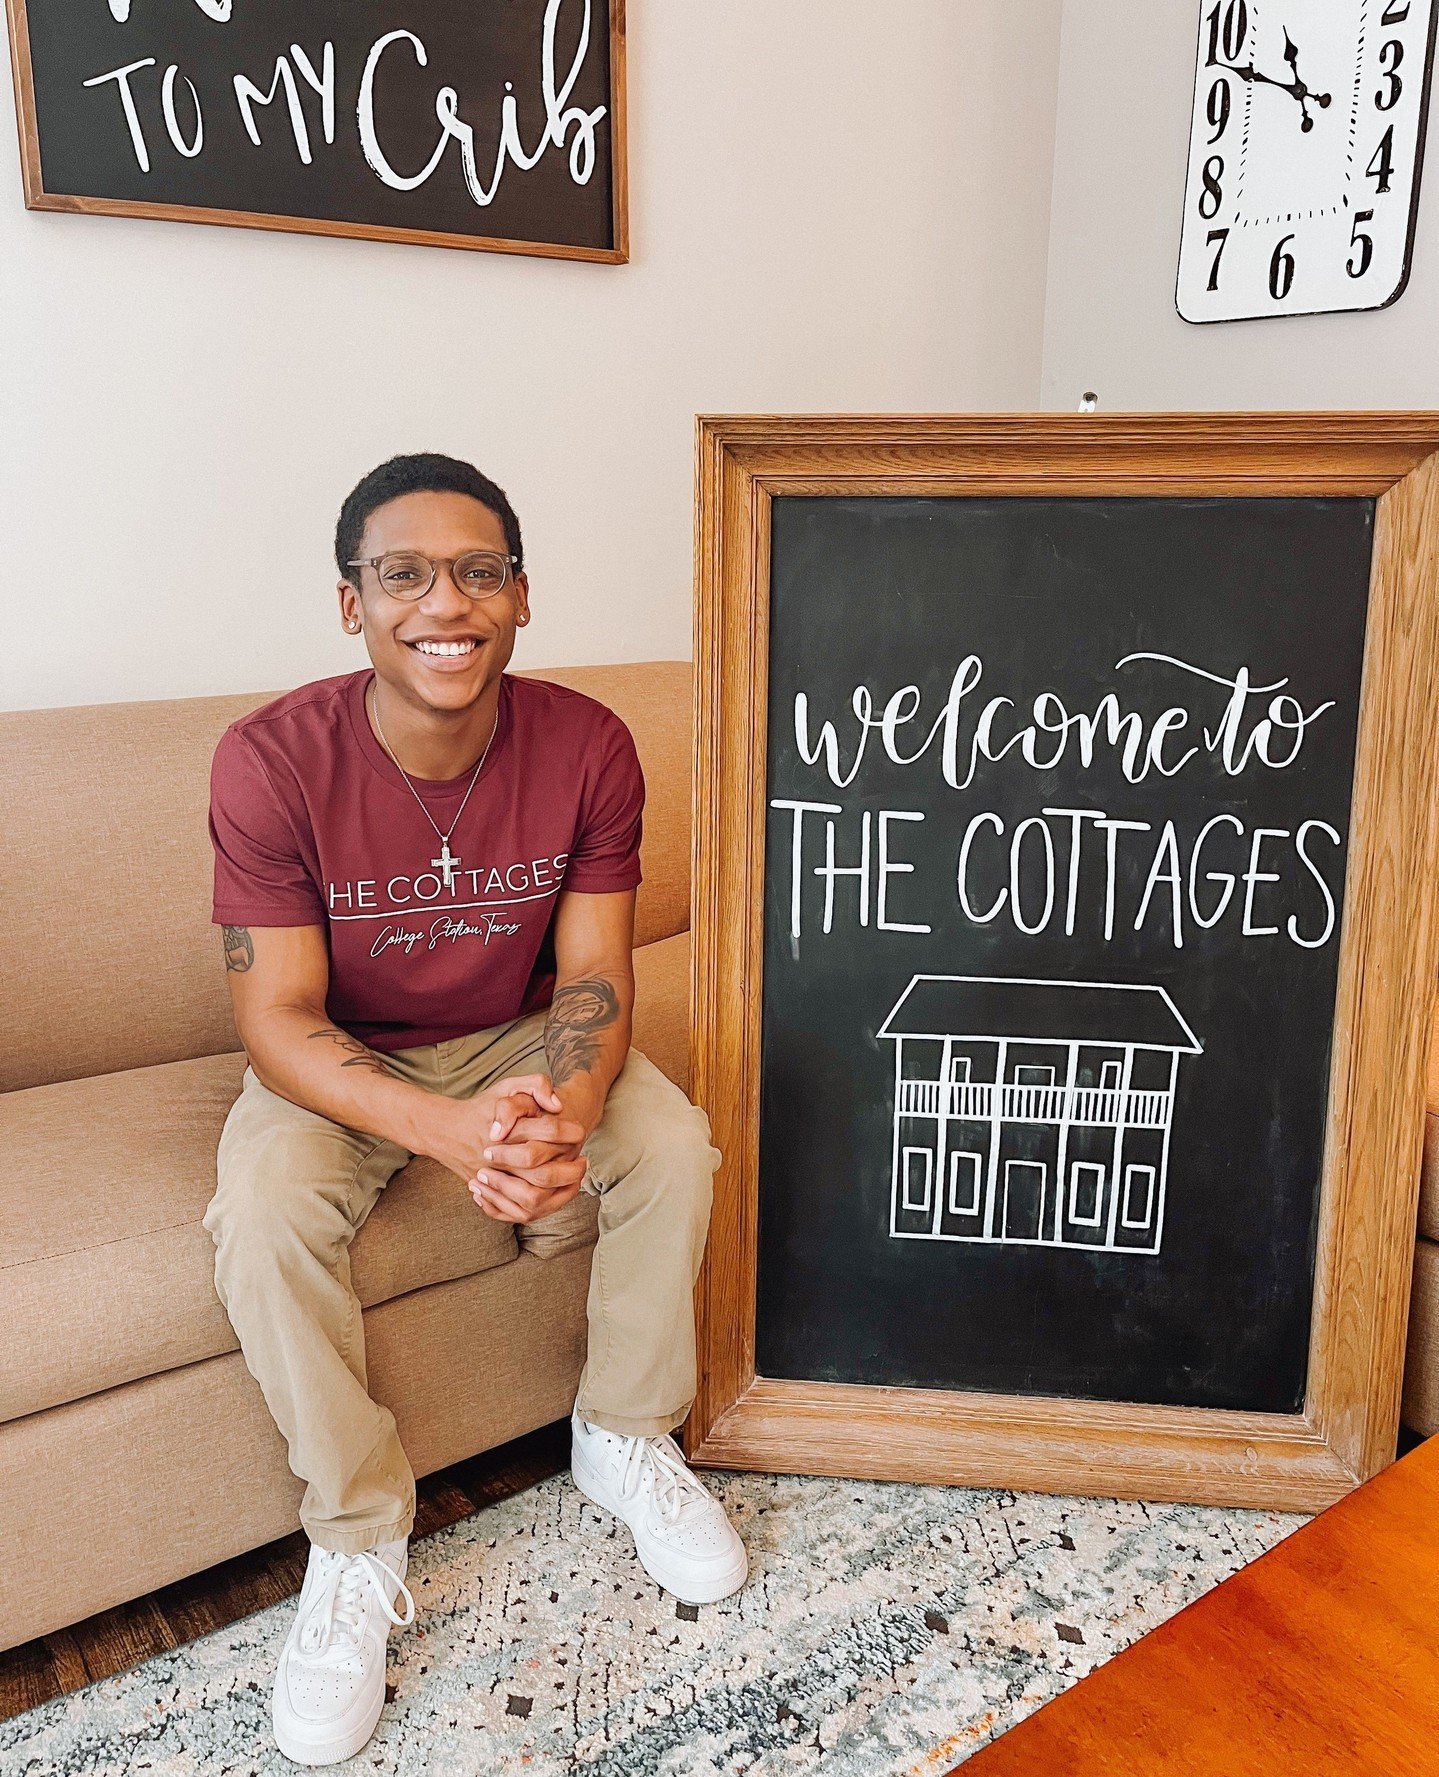 Your new home awaits! 🏠💫⁠
⁠
Still looking for housing? Look no further! Our off-campus housing options are here to make your search a breeze! Give us a call today before it's too late!🌟